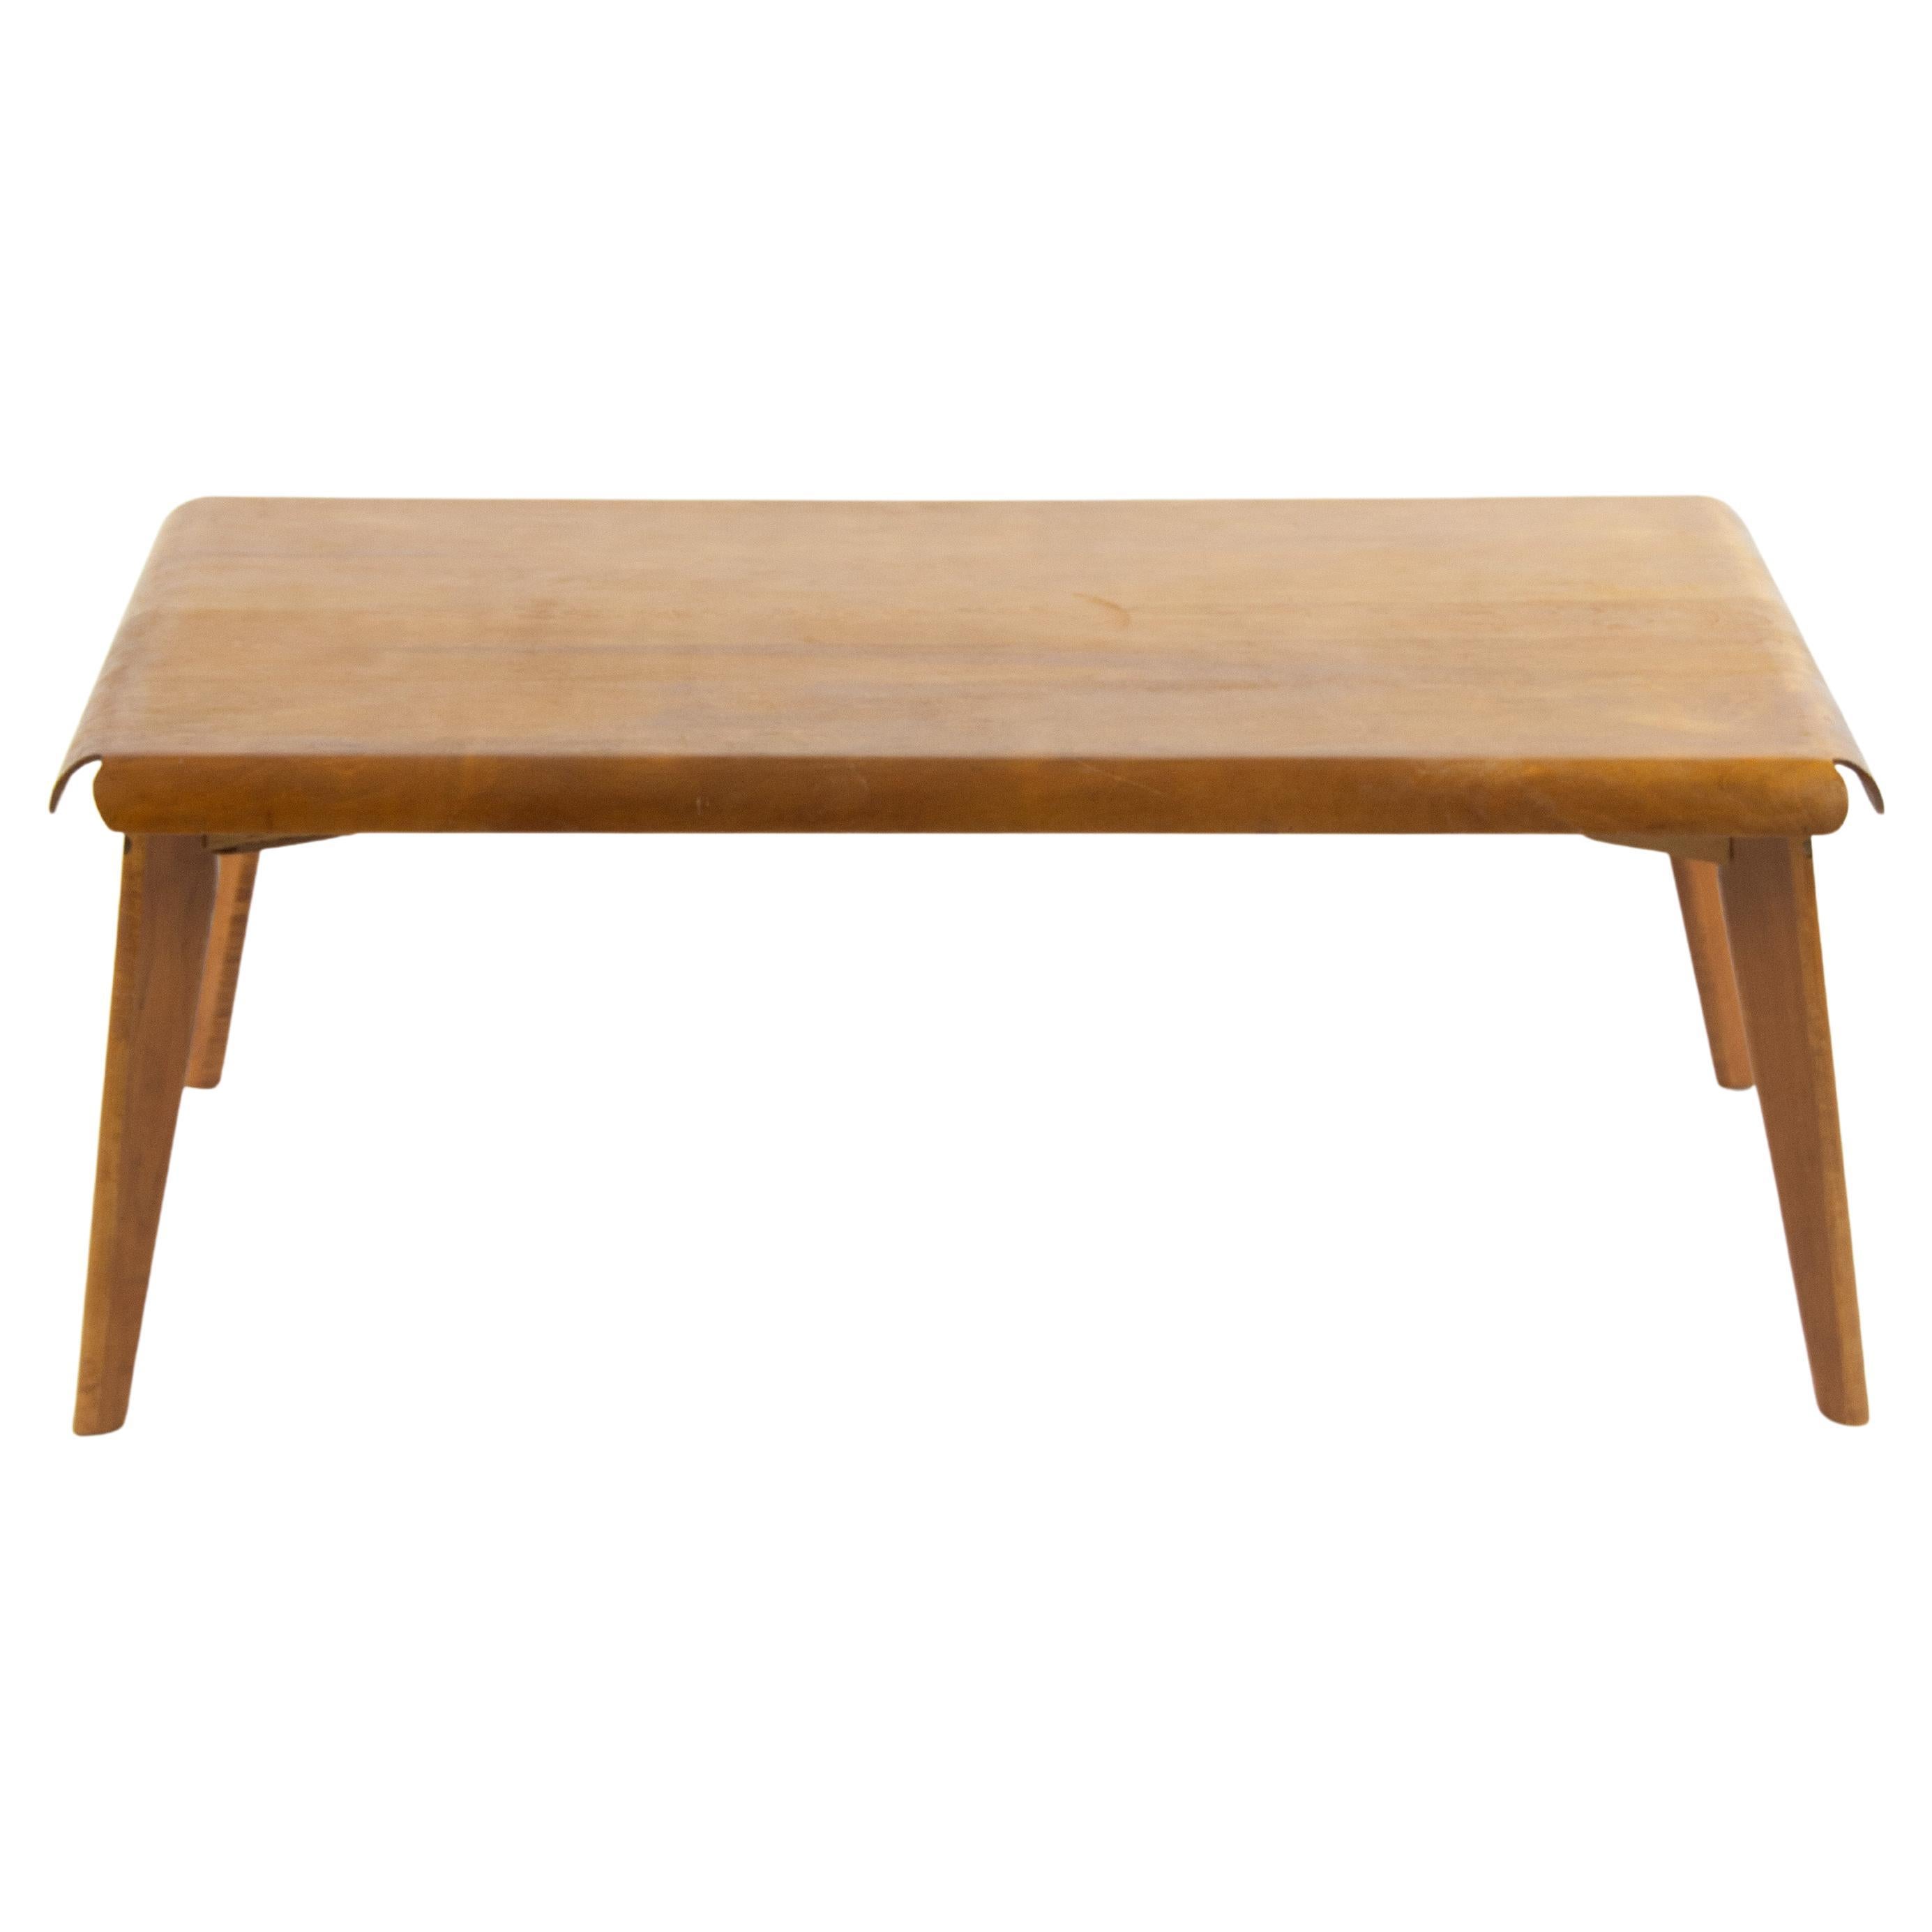 RARE Eames Evans Experimental Molded Plywood Coffee Table 1945 Pre Herman Miller For Sale